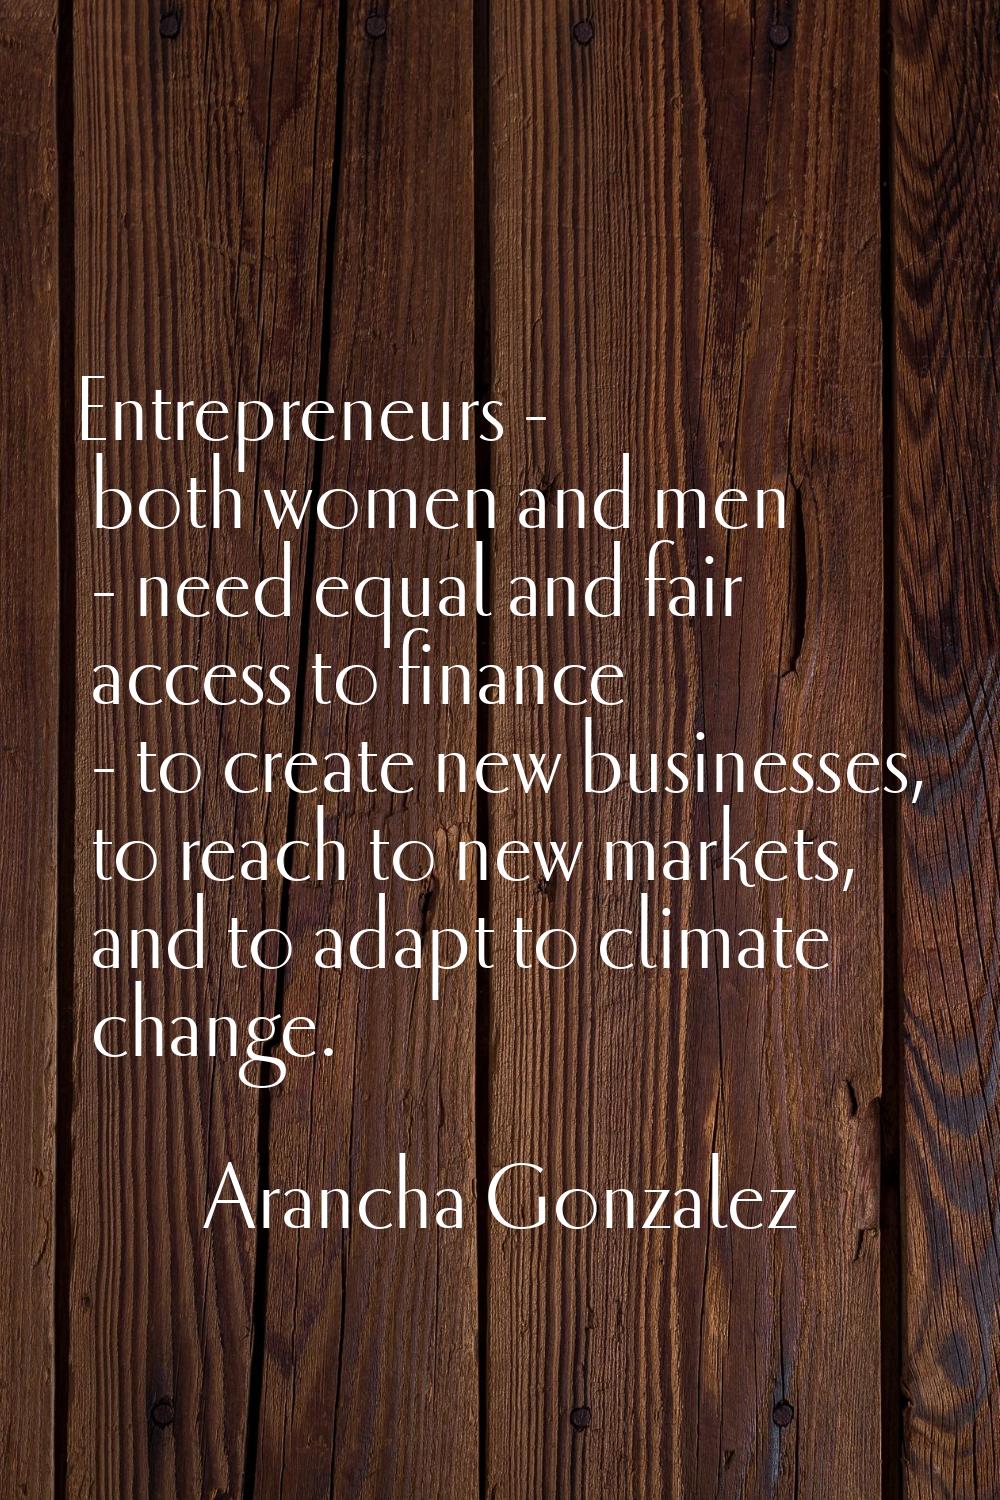 Entrepreneurs - both women and men - need equal and fair access to finance - to create new business